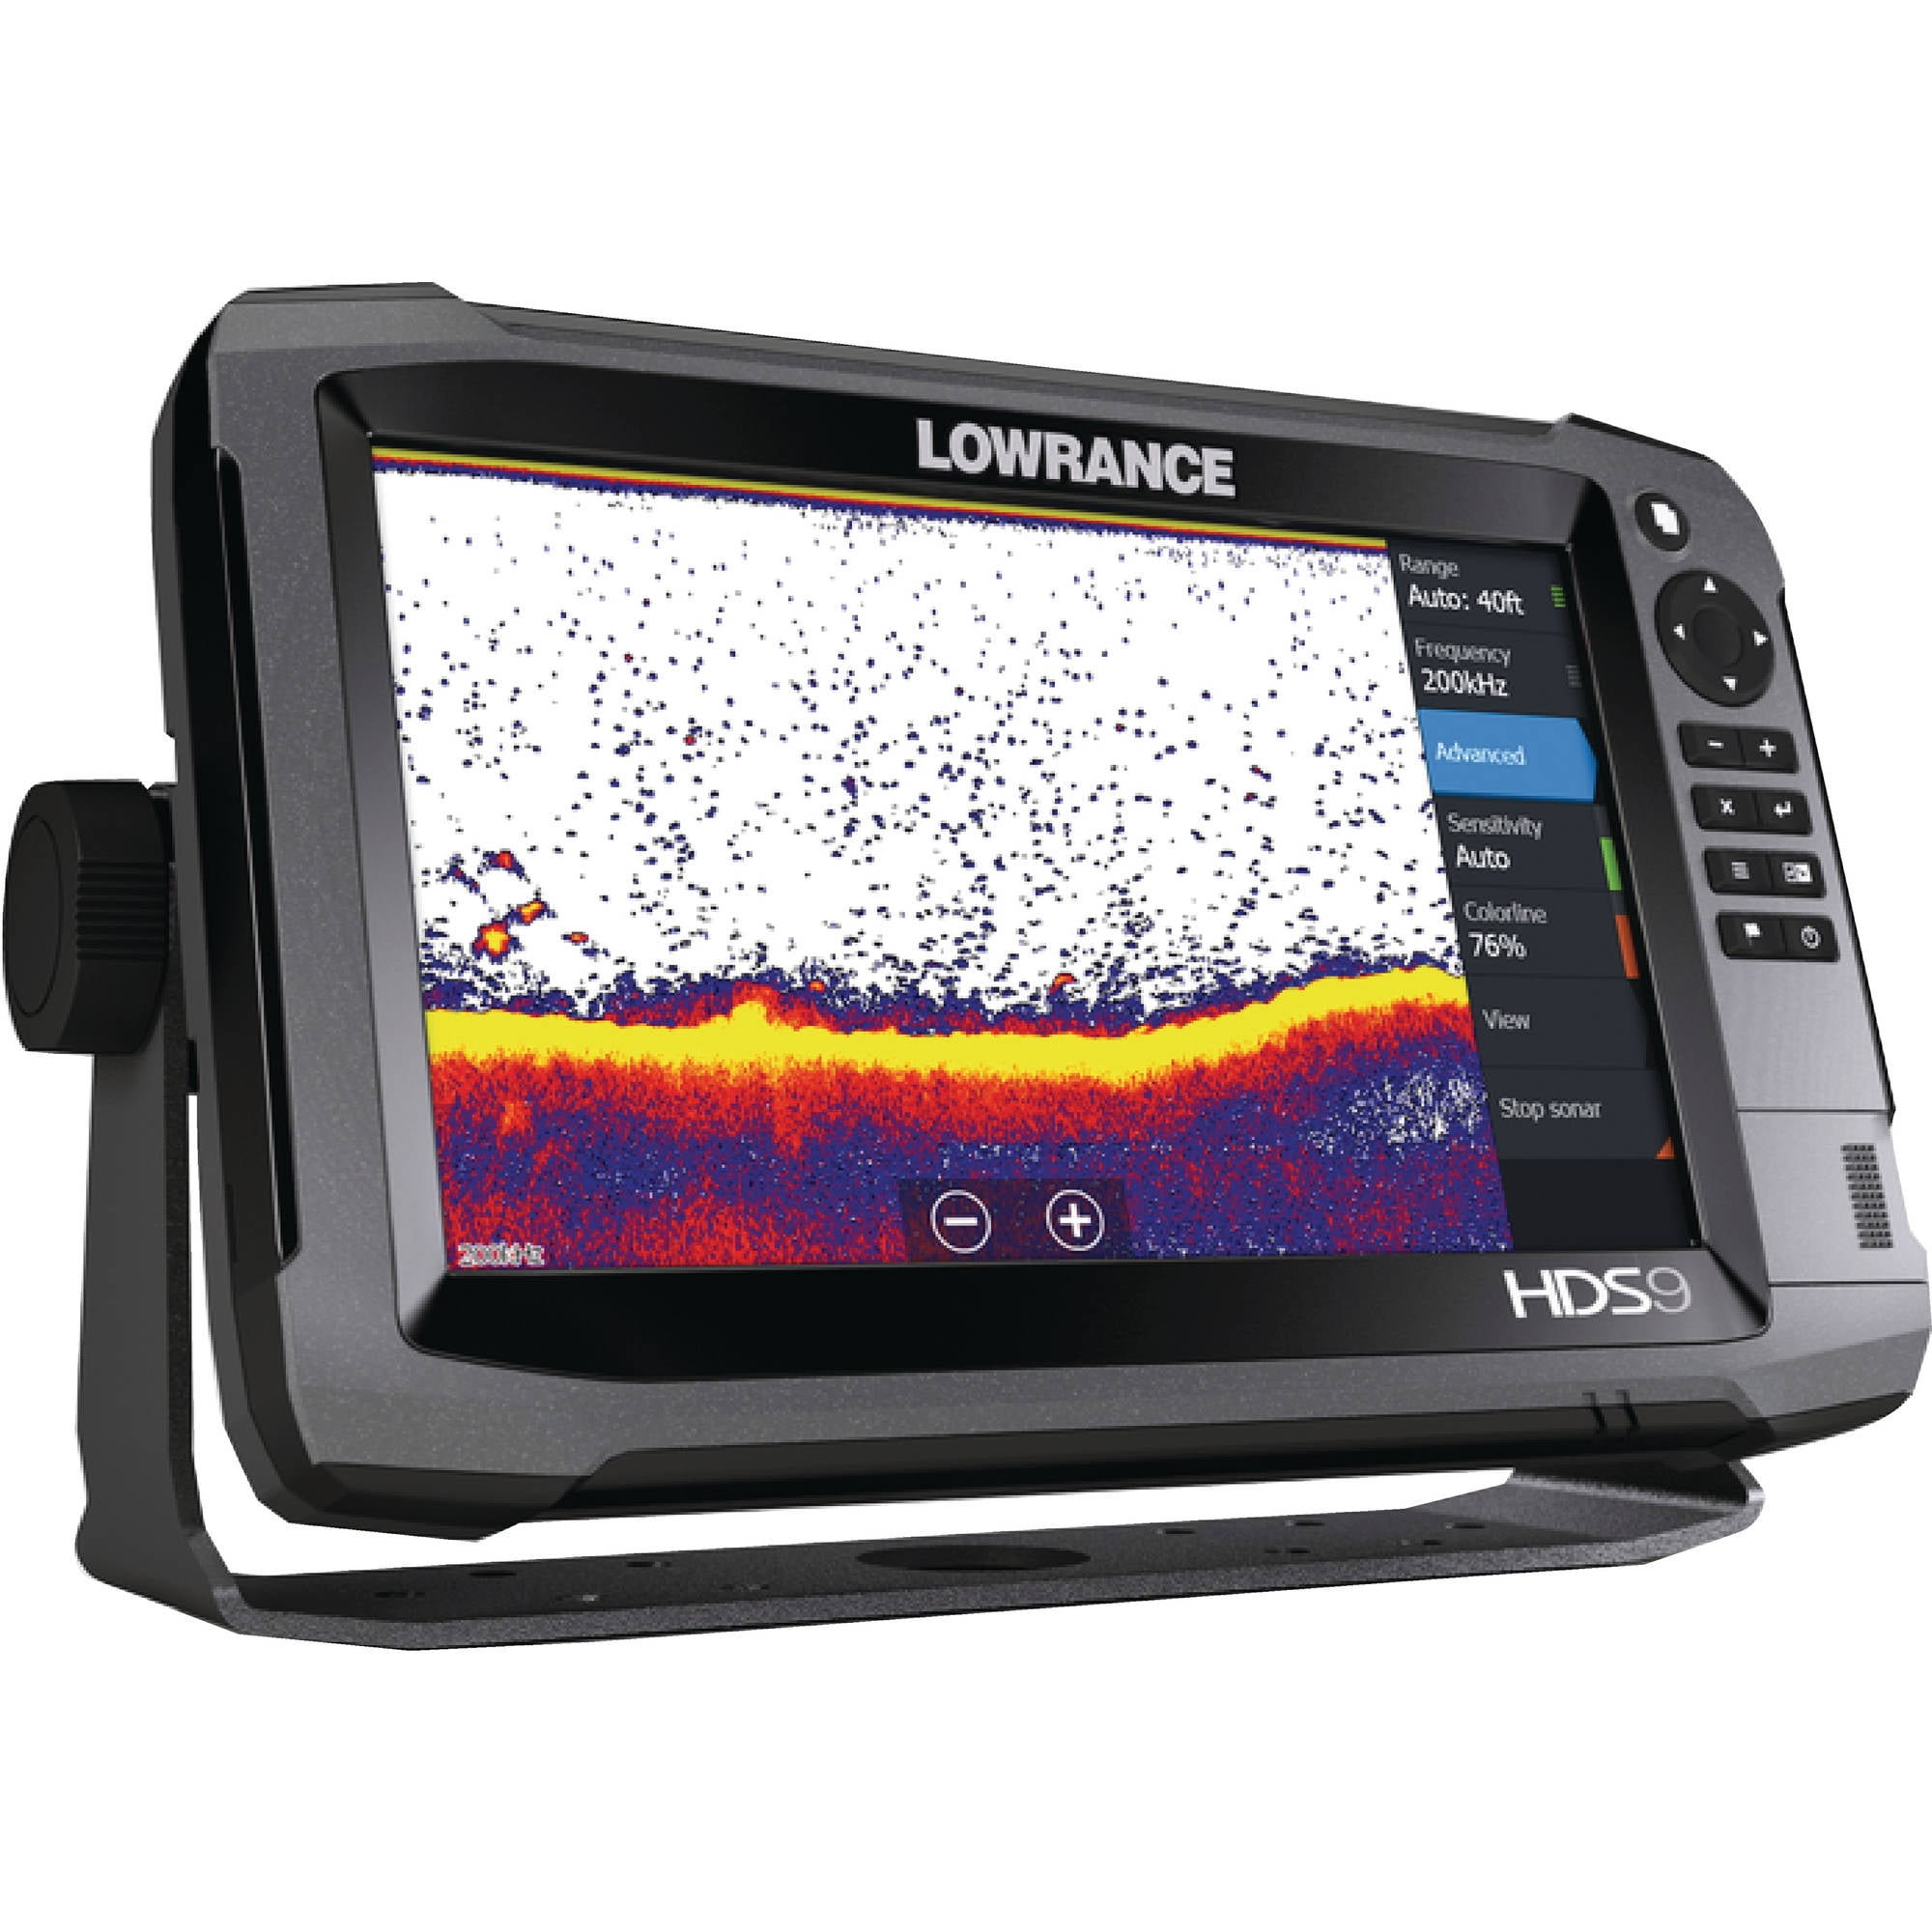 00012244001 Hds-9 Gen 3 Lowrance 000-12244-001 Suncover 